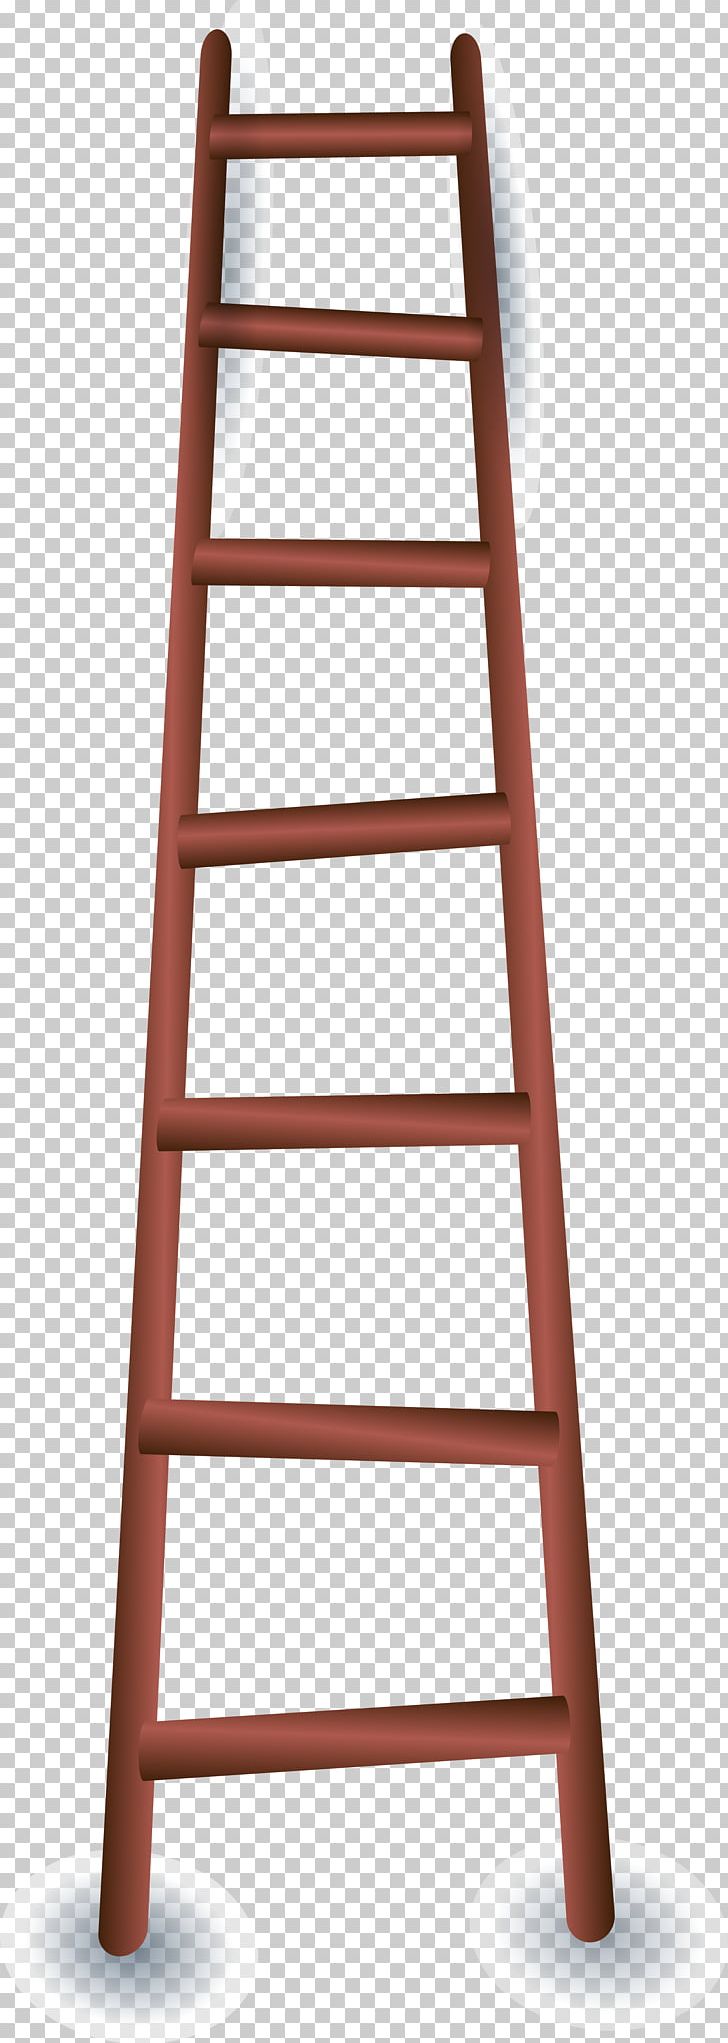 Ladder Stairs Icon PNG, Clipart, Adobe Illustrator, Animation, Book Ladder, Cartoon Ladder, Creative Ladder Free PNG Download